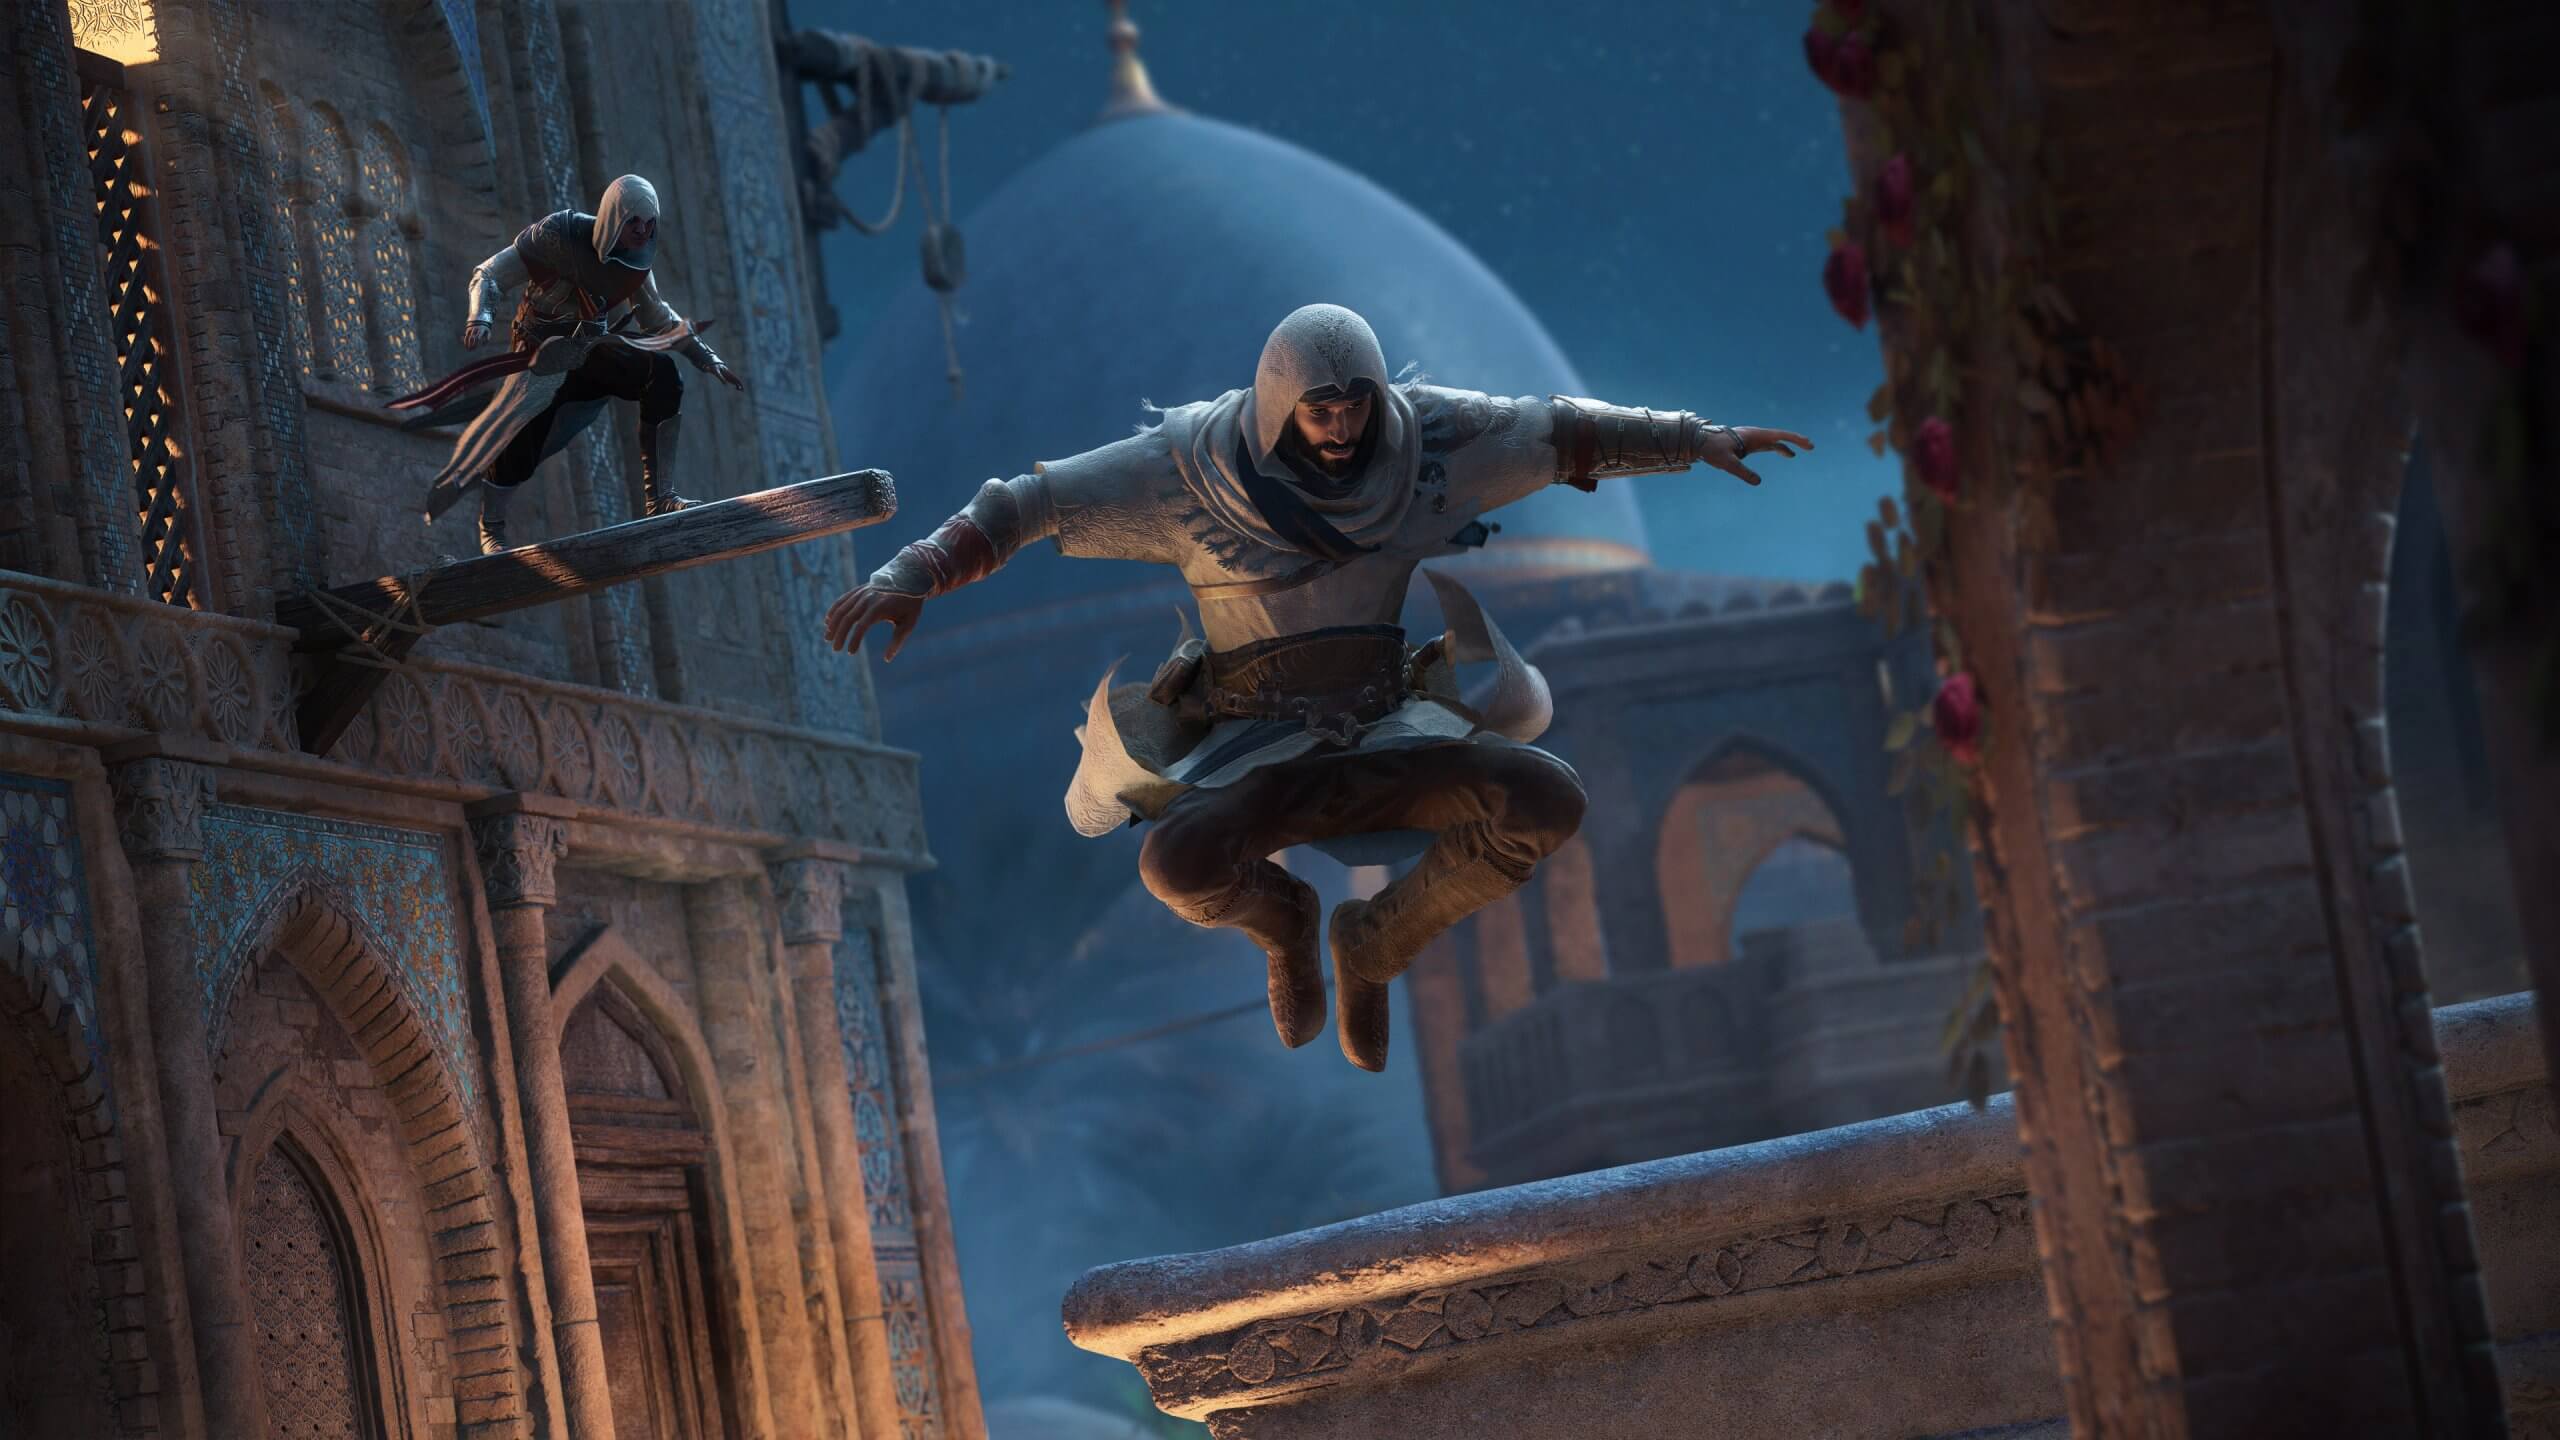 Assassin's Creed Valhalla comes to Steam, no longer an Epic